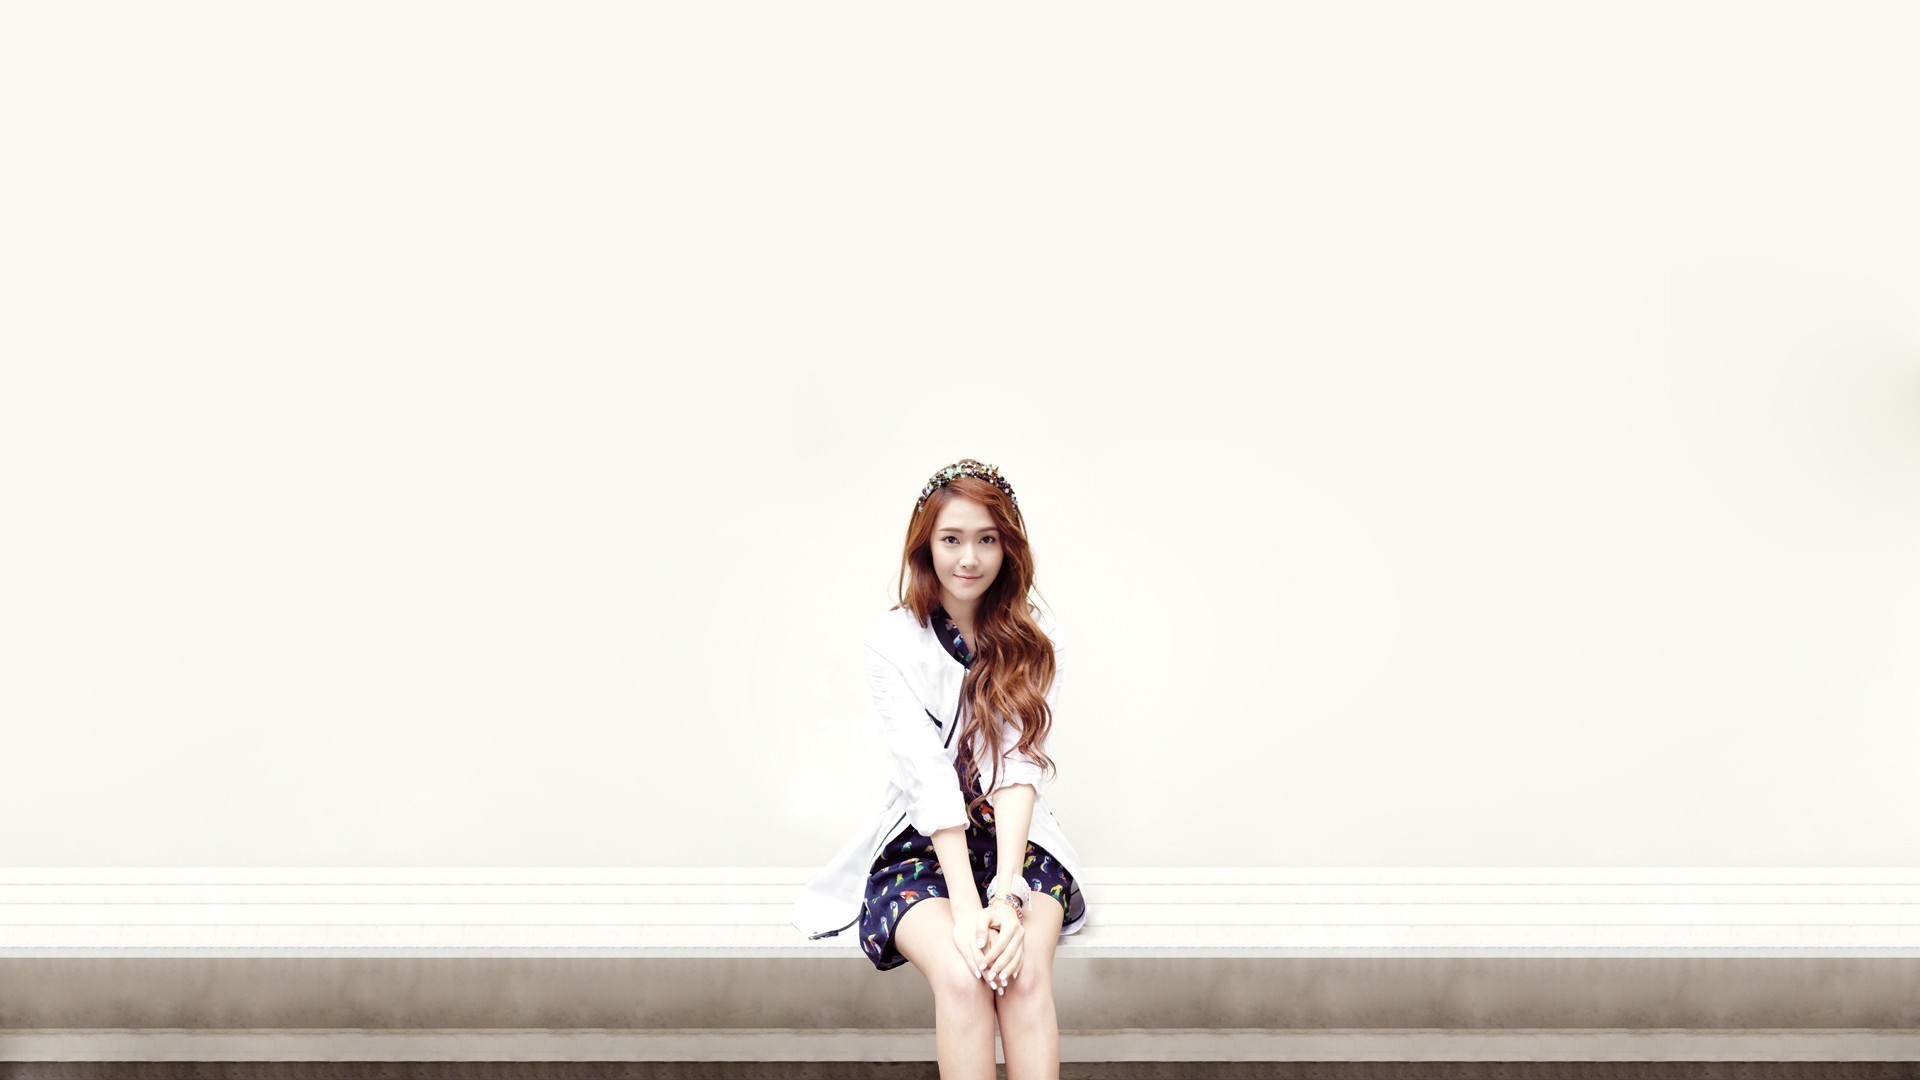 1920x1080 Jessica Snsd Backgrounds - Wallpaper Cave